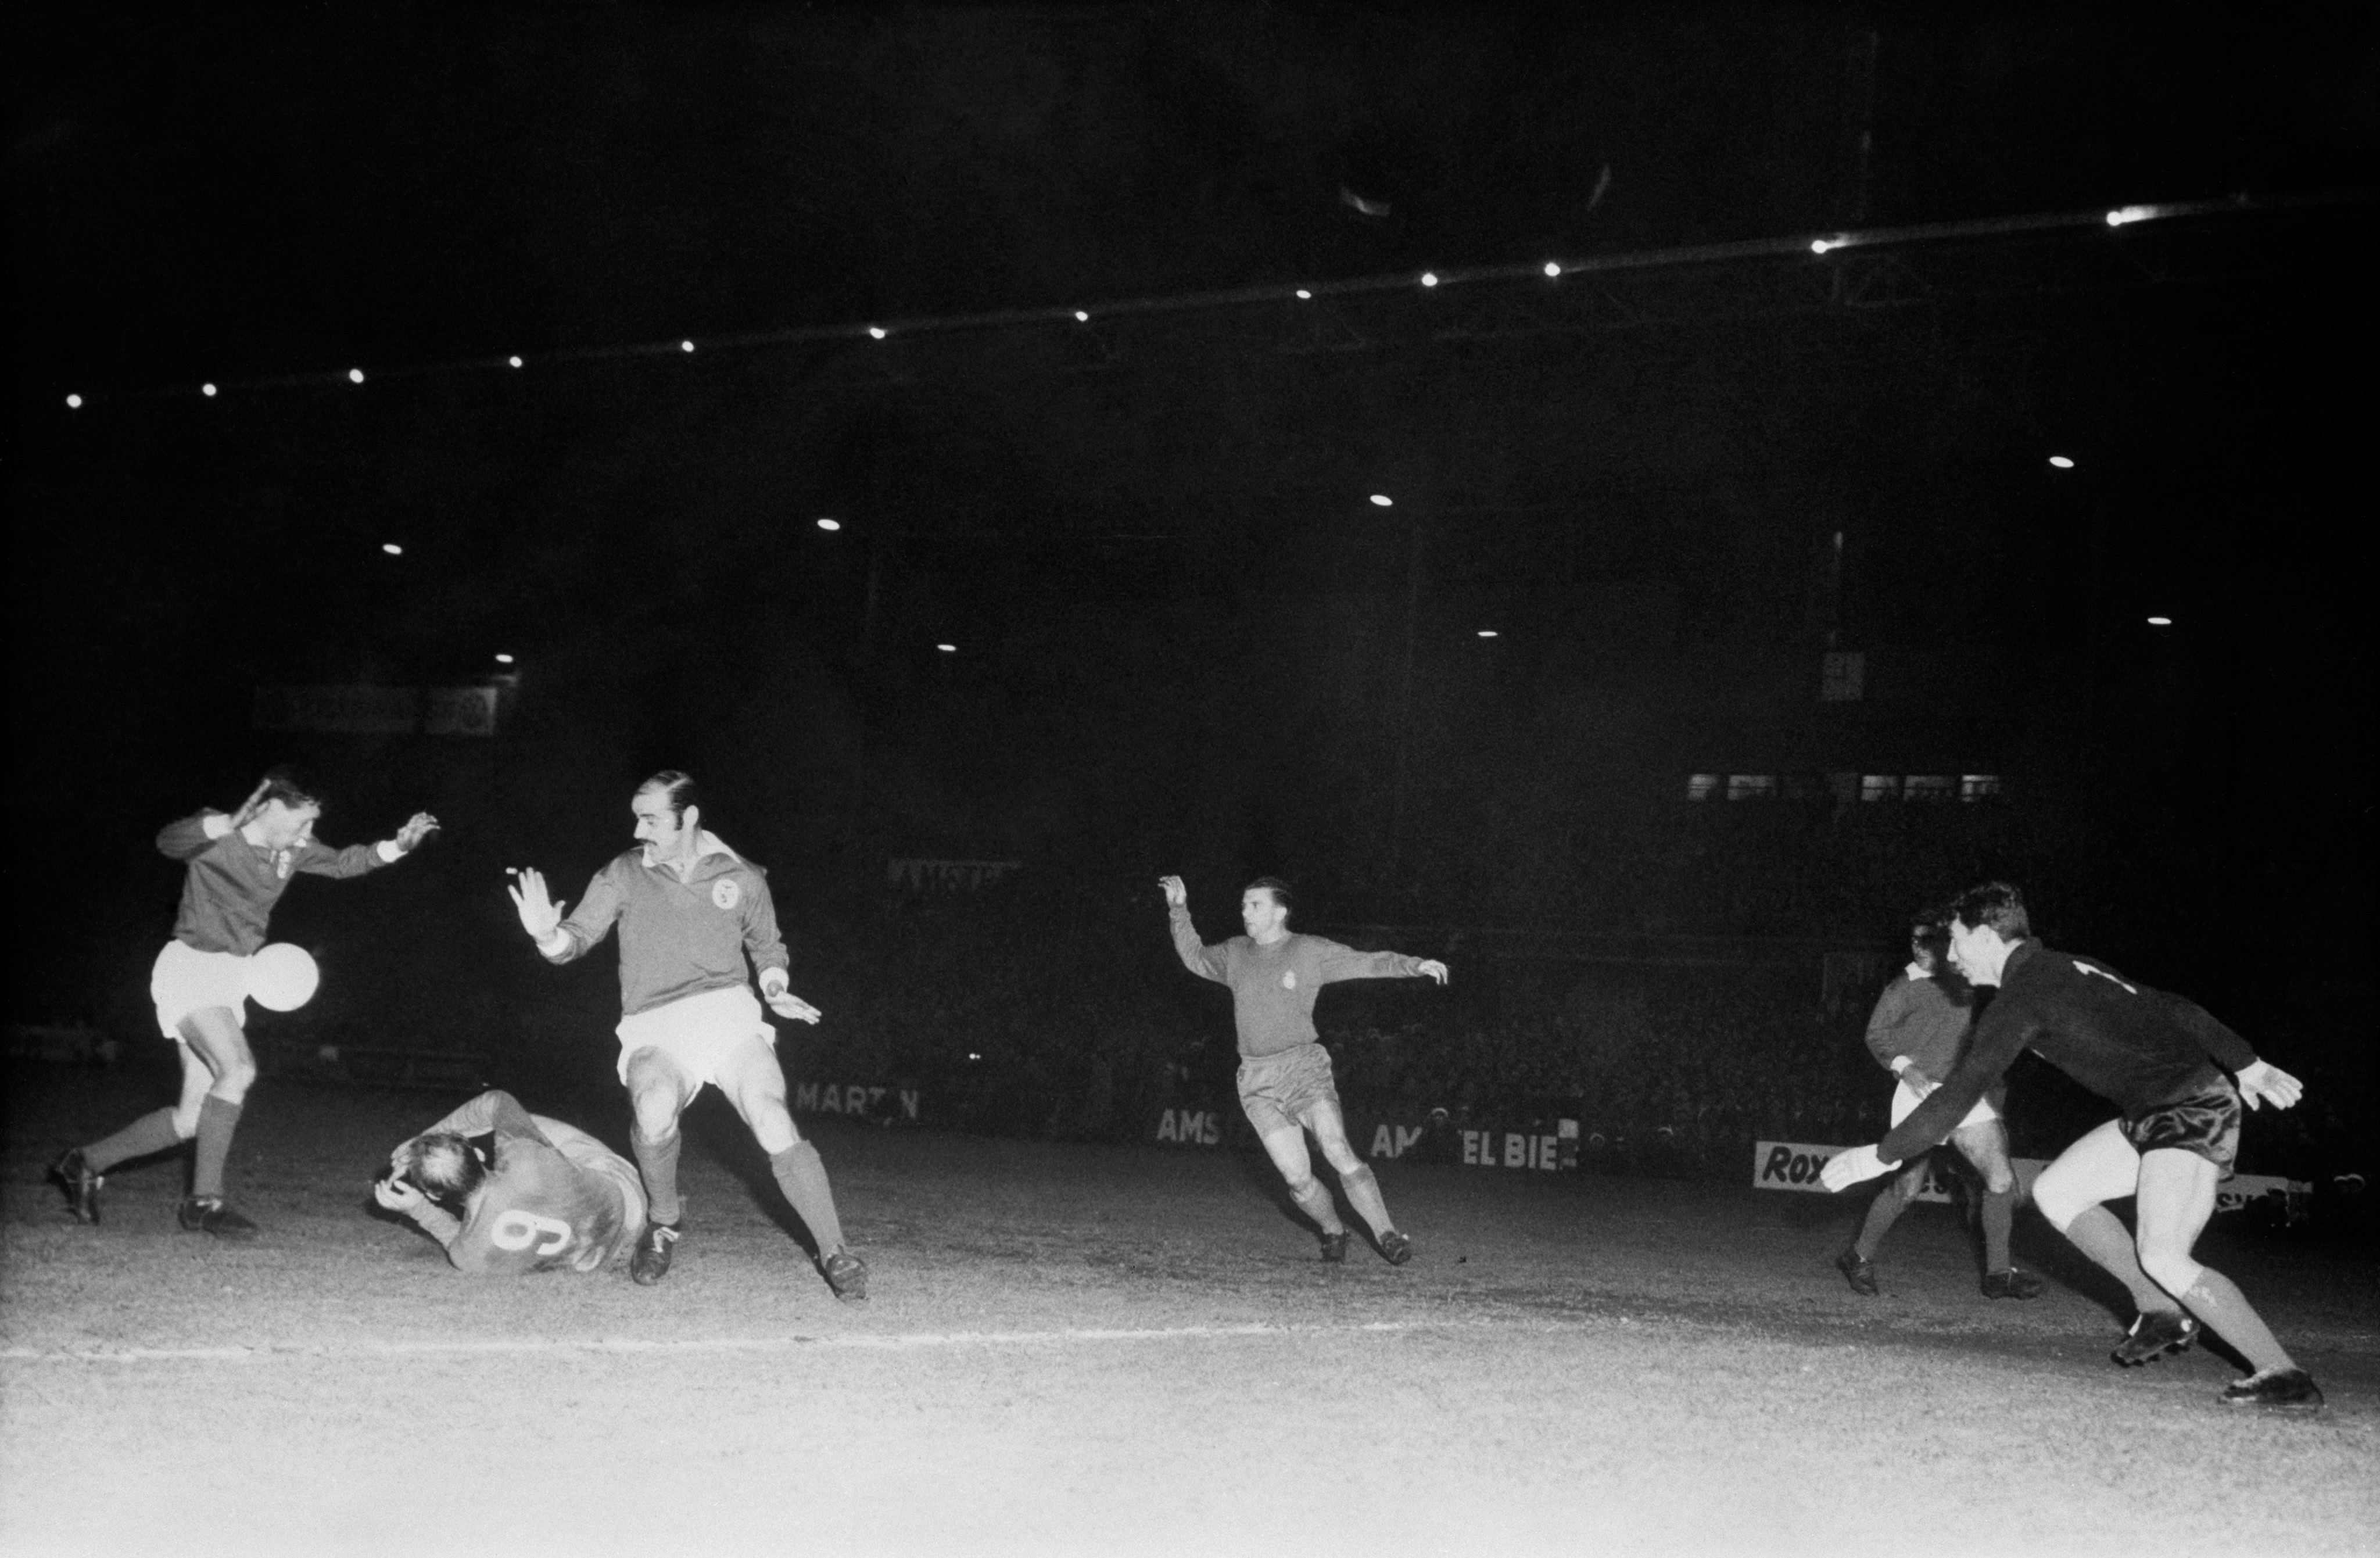 Soccer - European Cup Final - Benfica v Real Madrid - Olympisch Stadion, Amsterdam Benfica's Fernando Cruz (l) and Germano (3rd left) thwart Real Madrid's Alfredo Di Stefano (on floor) during an attack watched by Real Madrid's Ferenc Puskas (4th left) and Benfica goalkeeper Alberto da Costa Pereira (r). The game finished 5-3 to Benfica. Archive-PA96106-3 Date: 02/05/1962